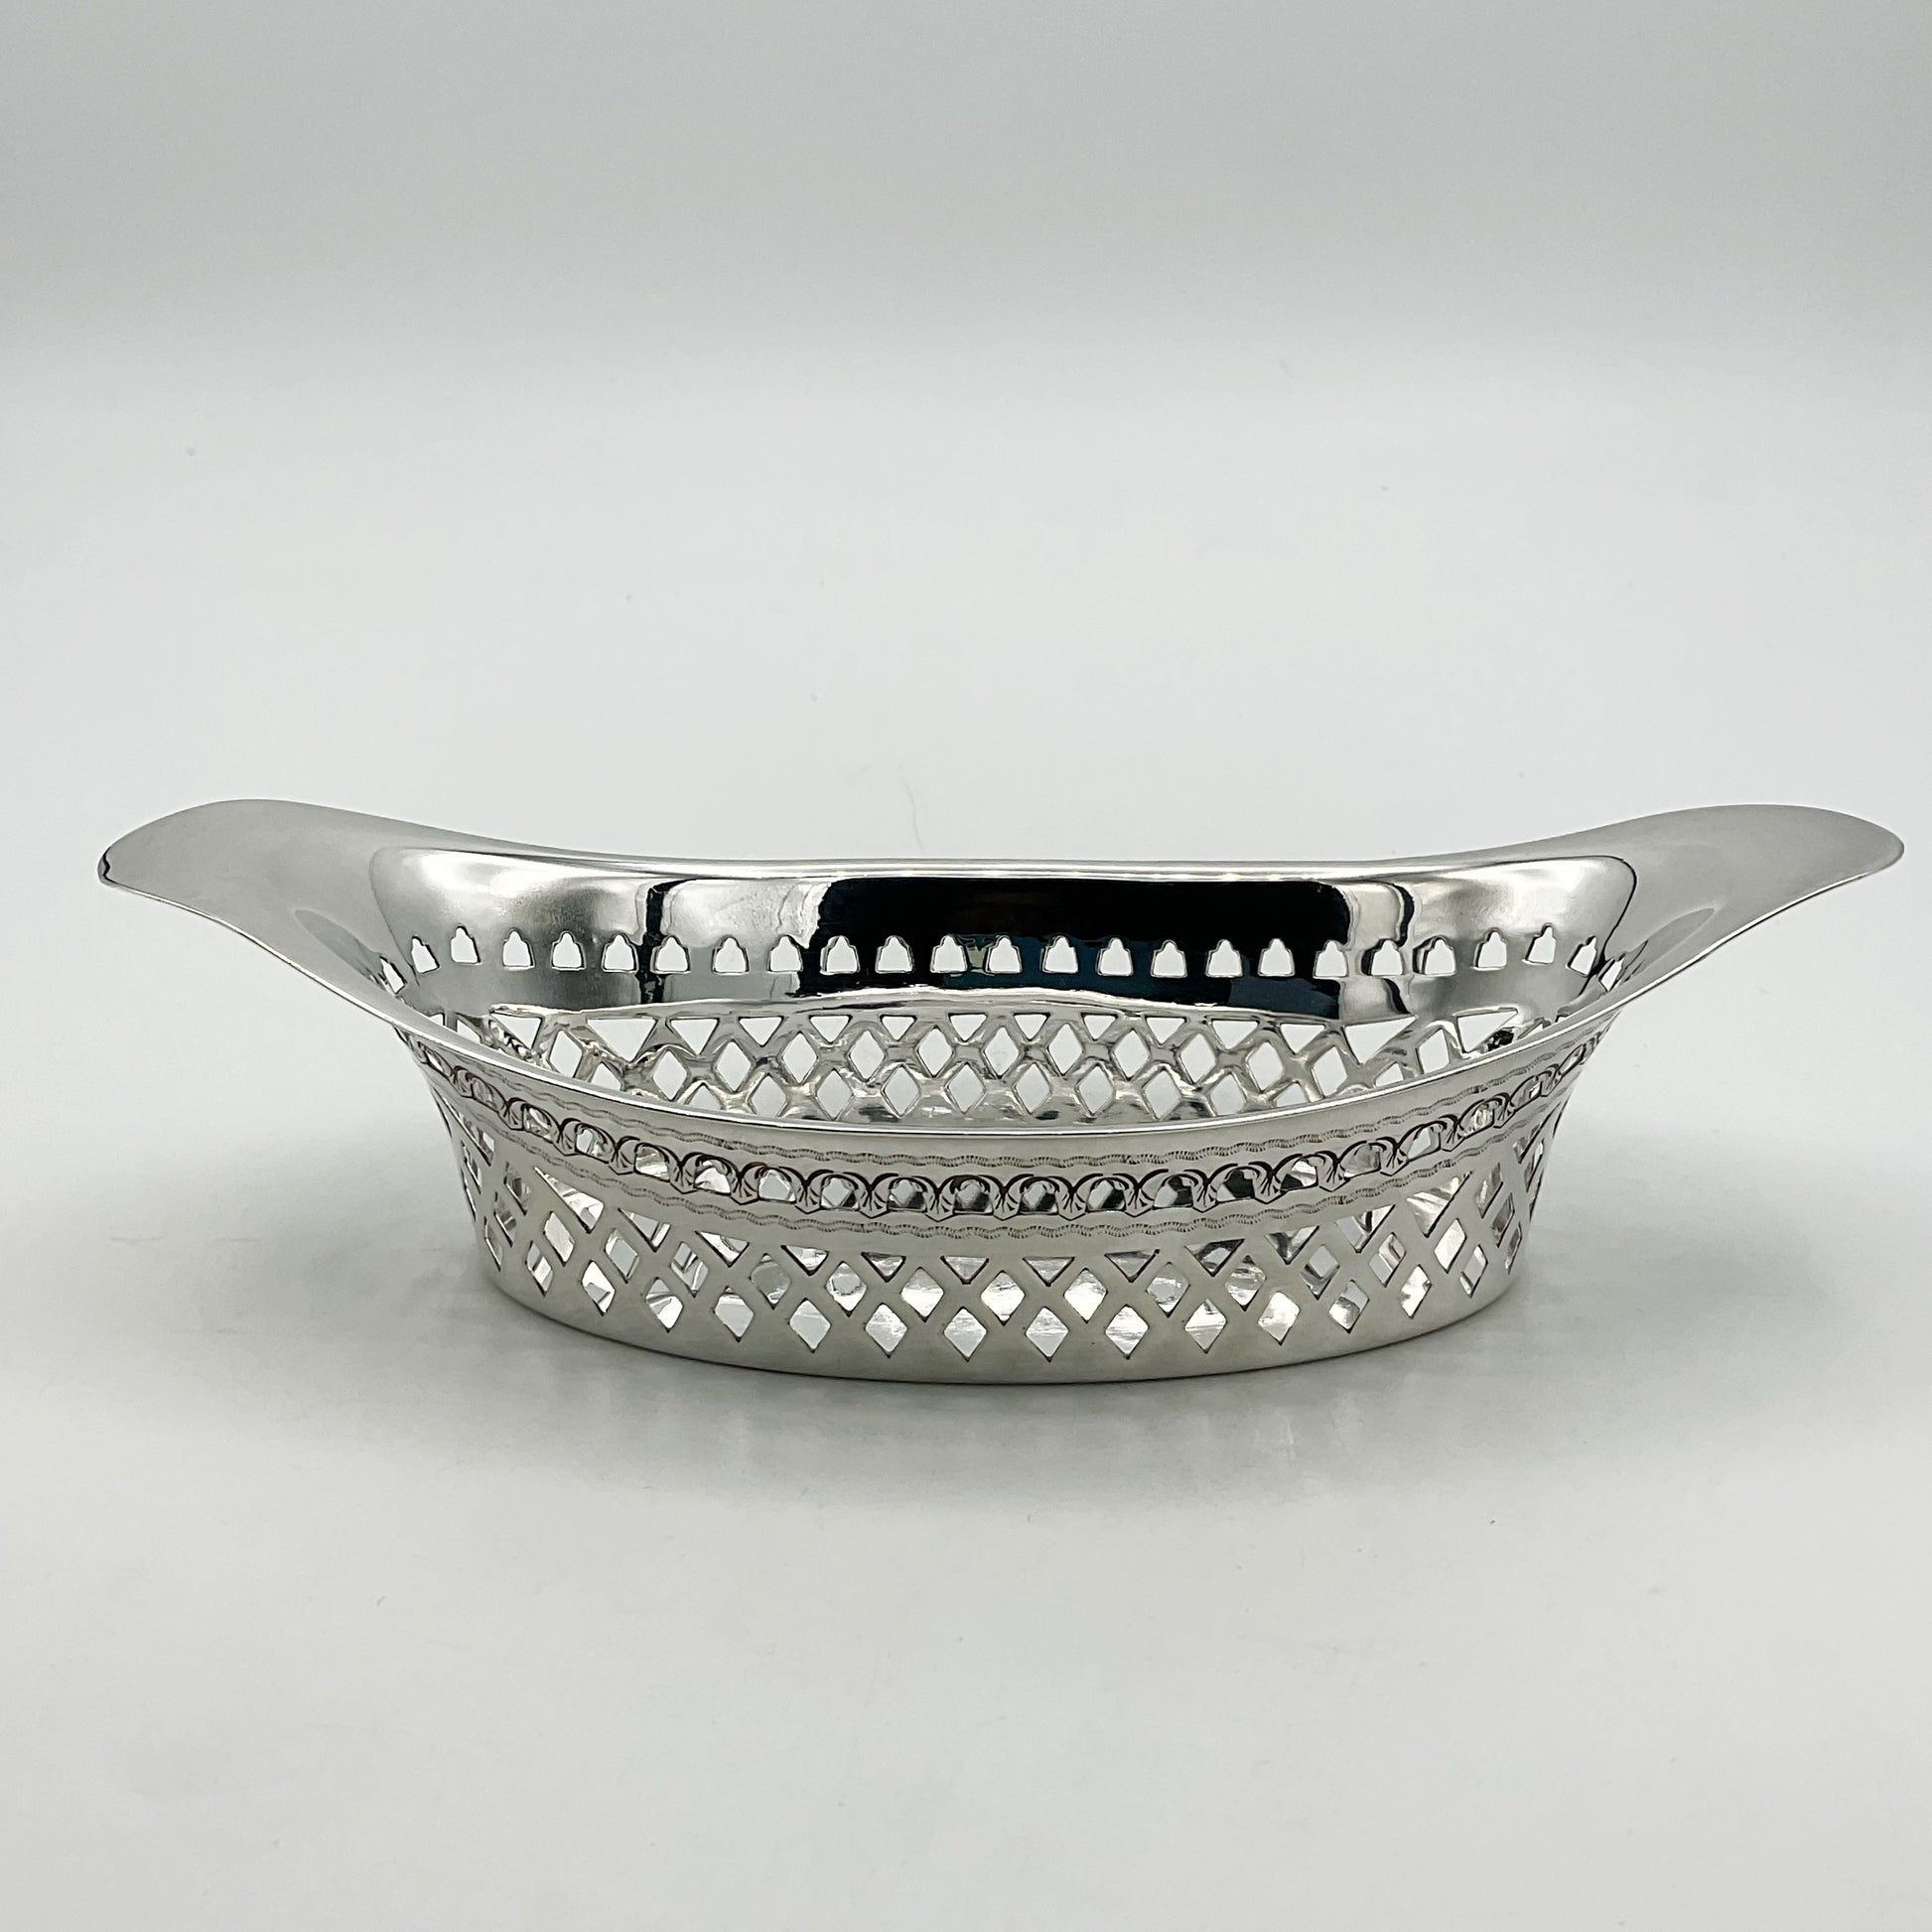 Side view of beautifully decorated silver bowl